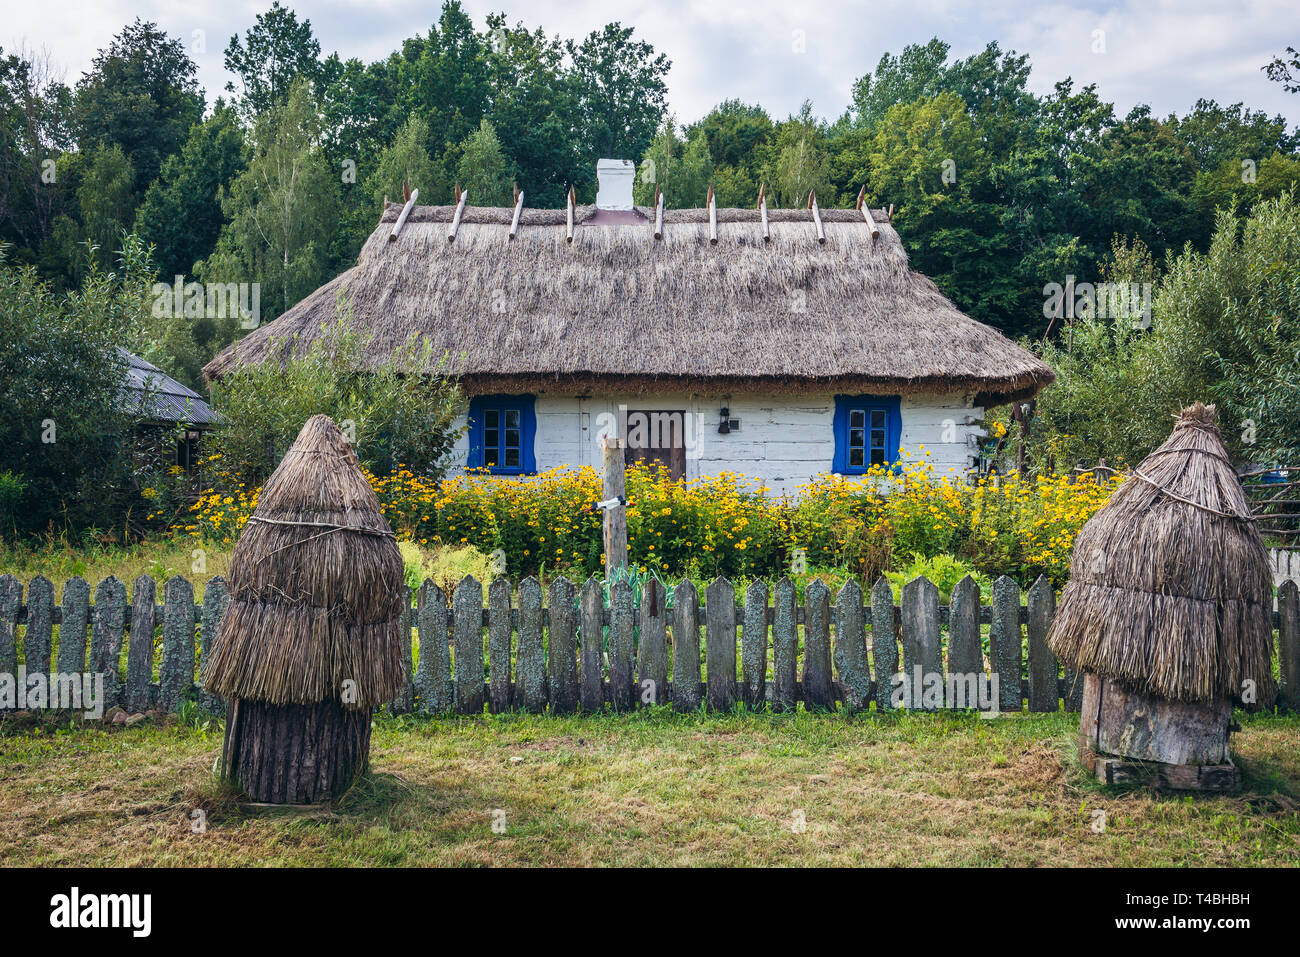 Wooden house with thatched roof in Bialowieskie Siolo inn in Budy village, Podlaskie Voivodeship in Poland Stock Photo